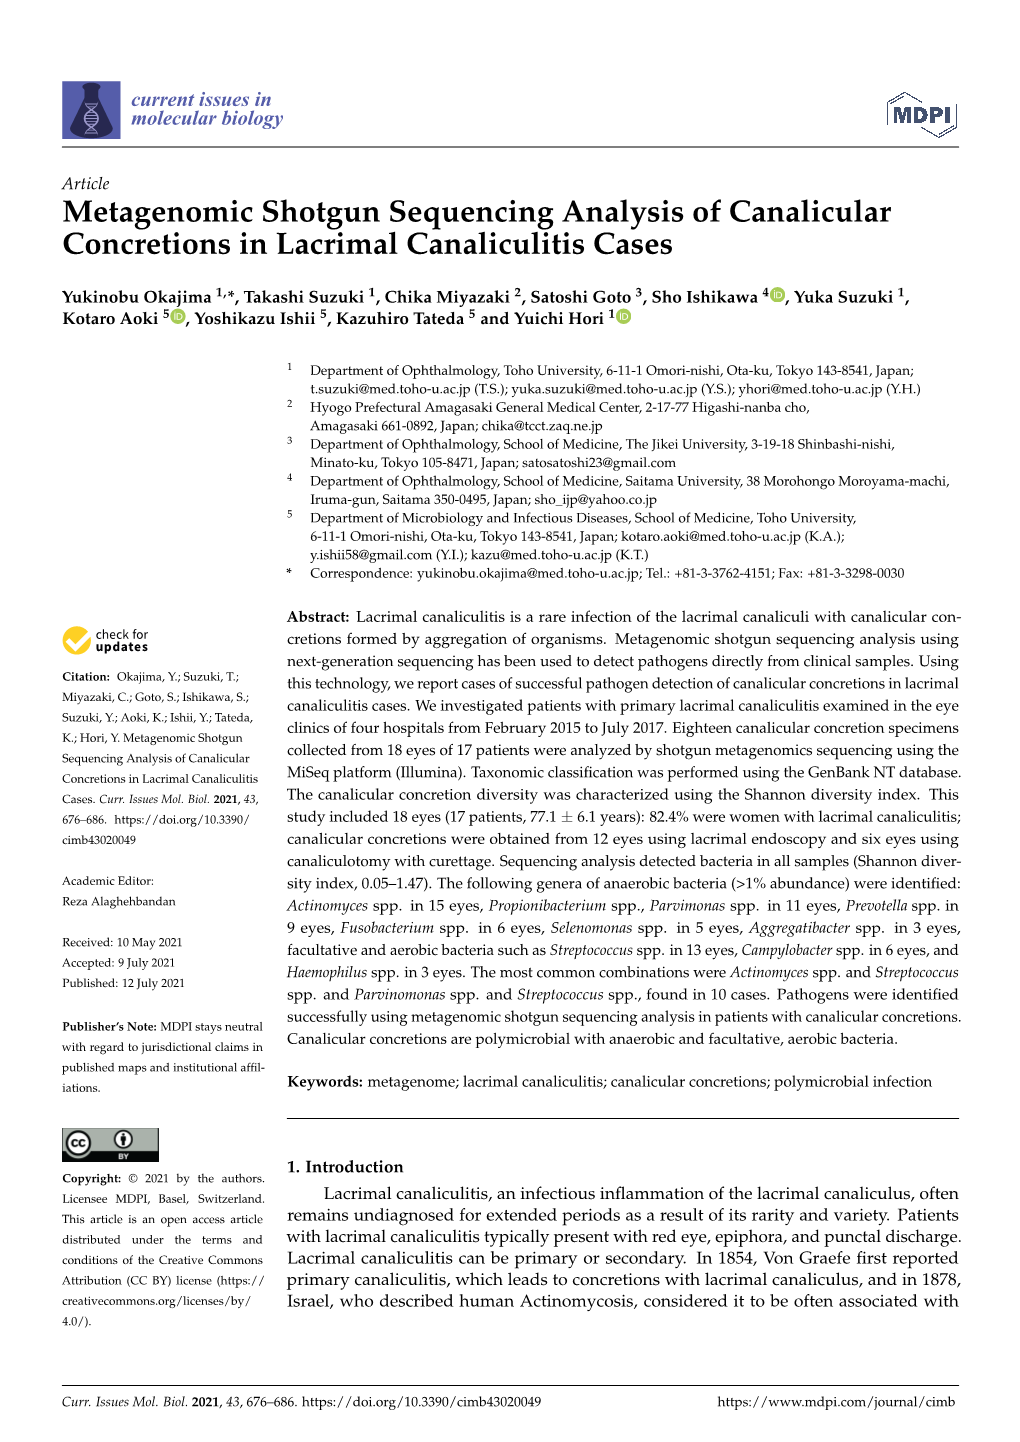 Metagenomic Shotgun Sequencing Analysis of Canalicular Concretions in Lacrimal Canaliculitis Cases